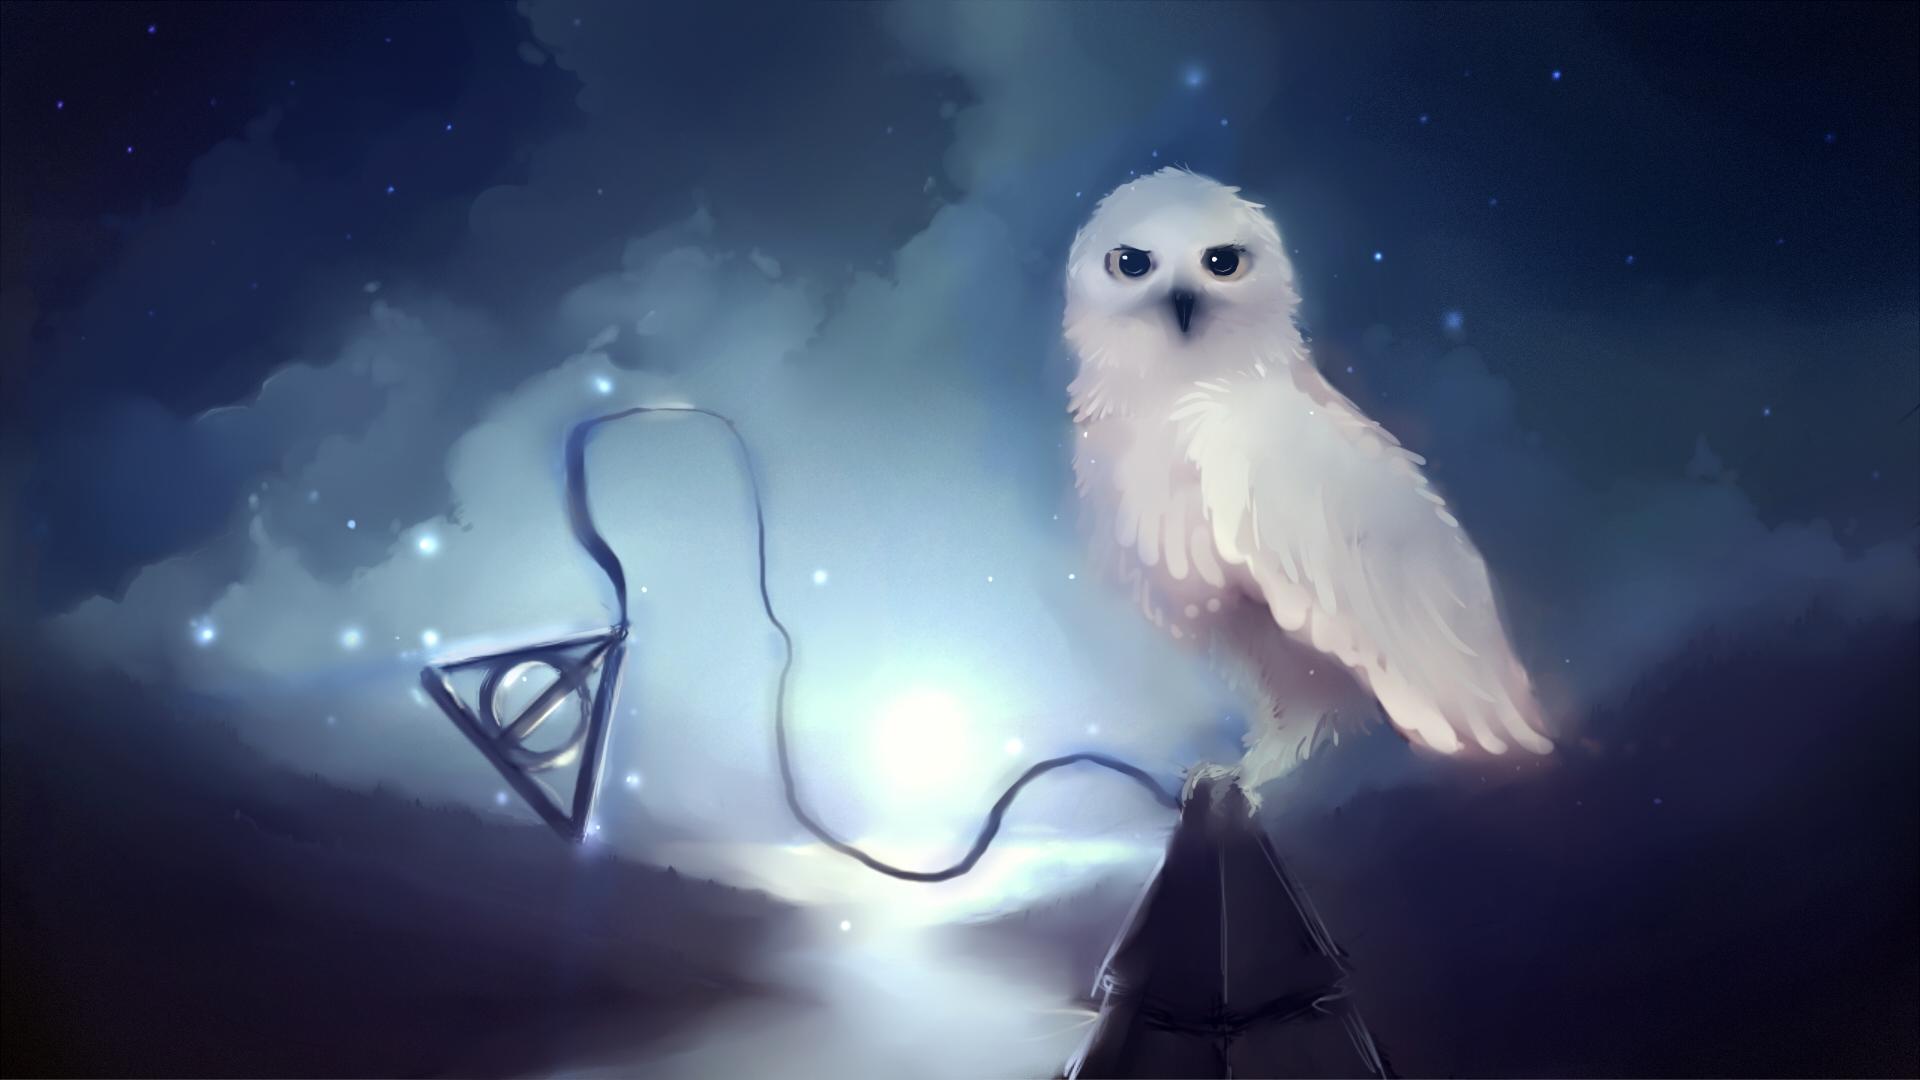 HEDWIG AND THE DEATHLY HALLOWS NECKLACE WALLPAPER - - HD